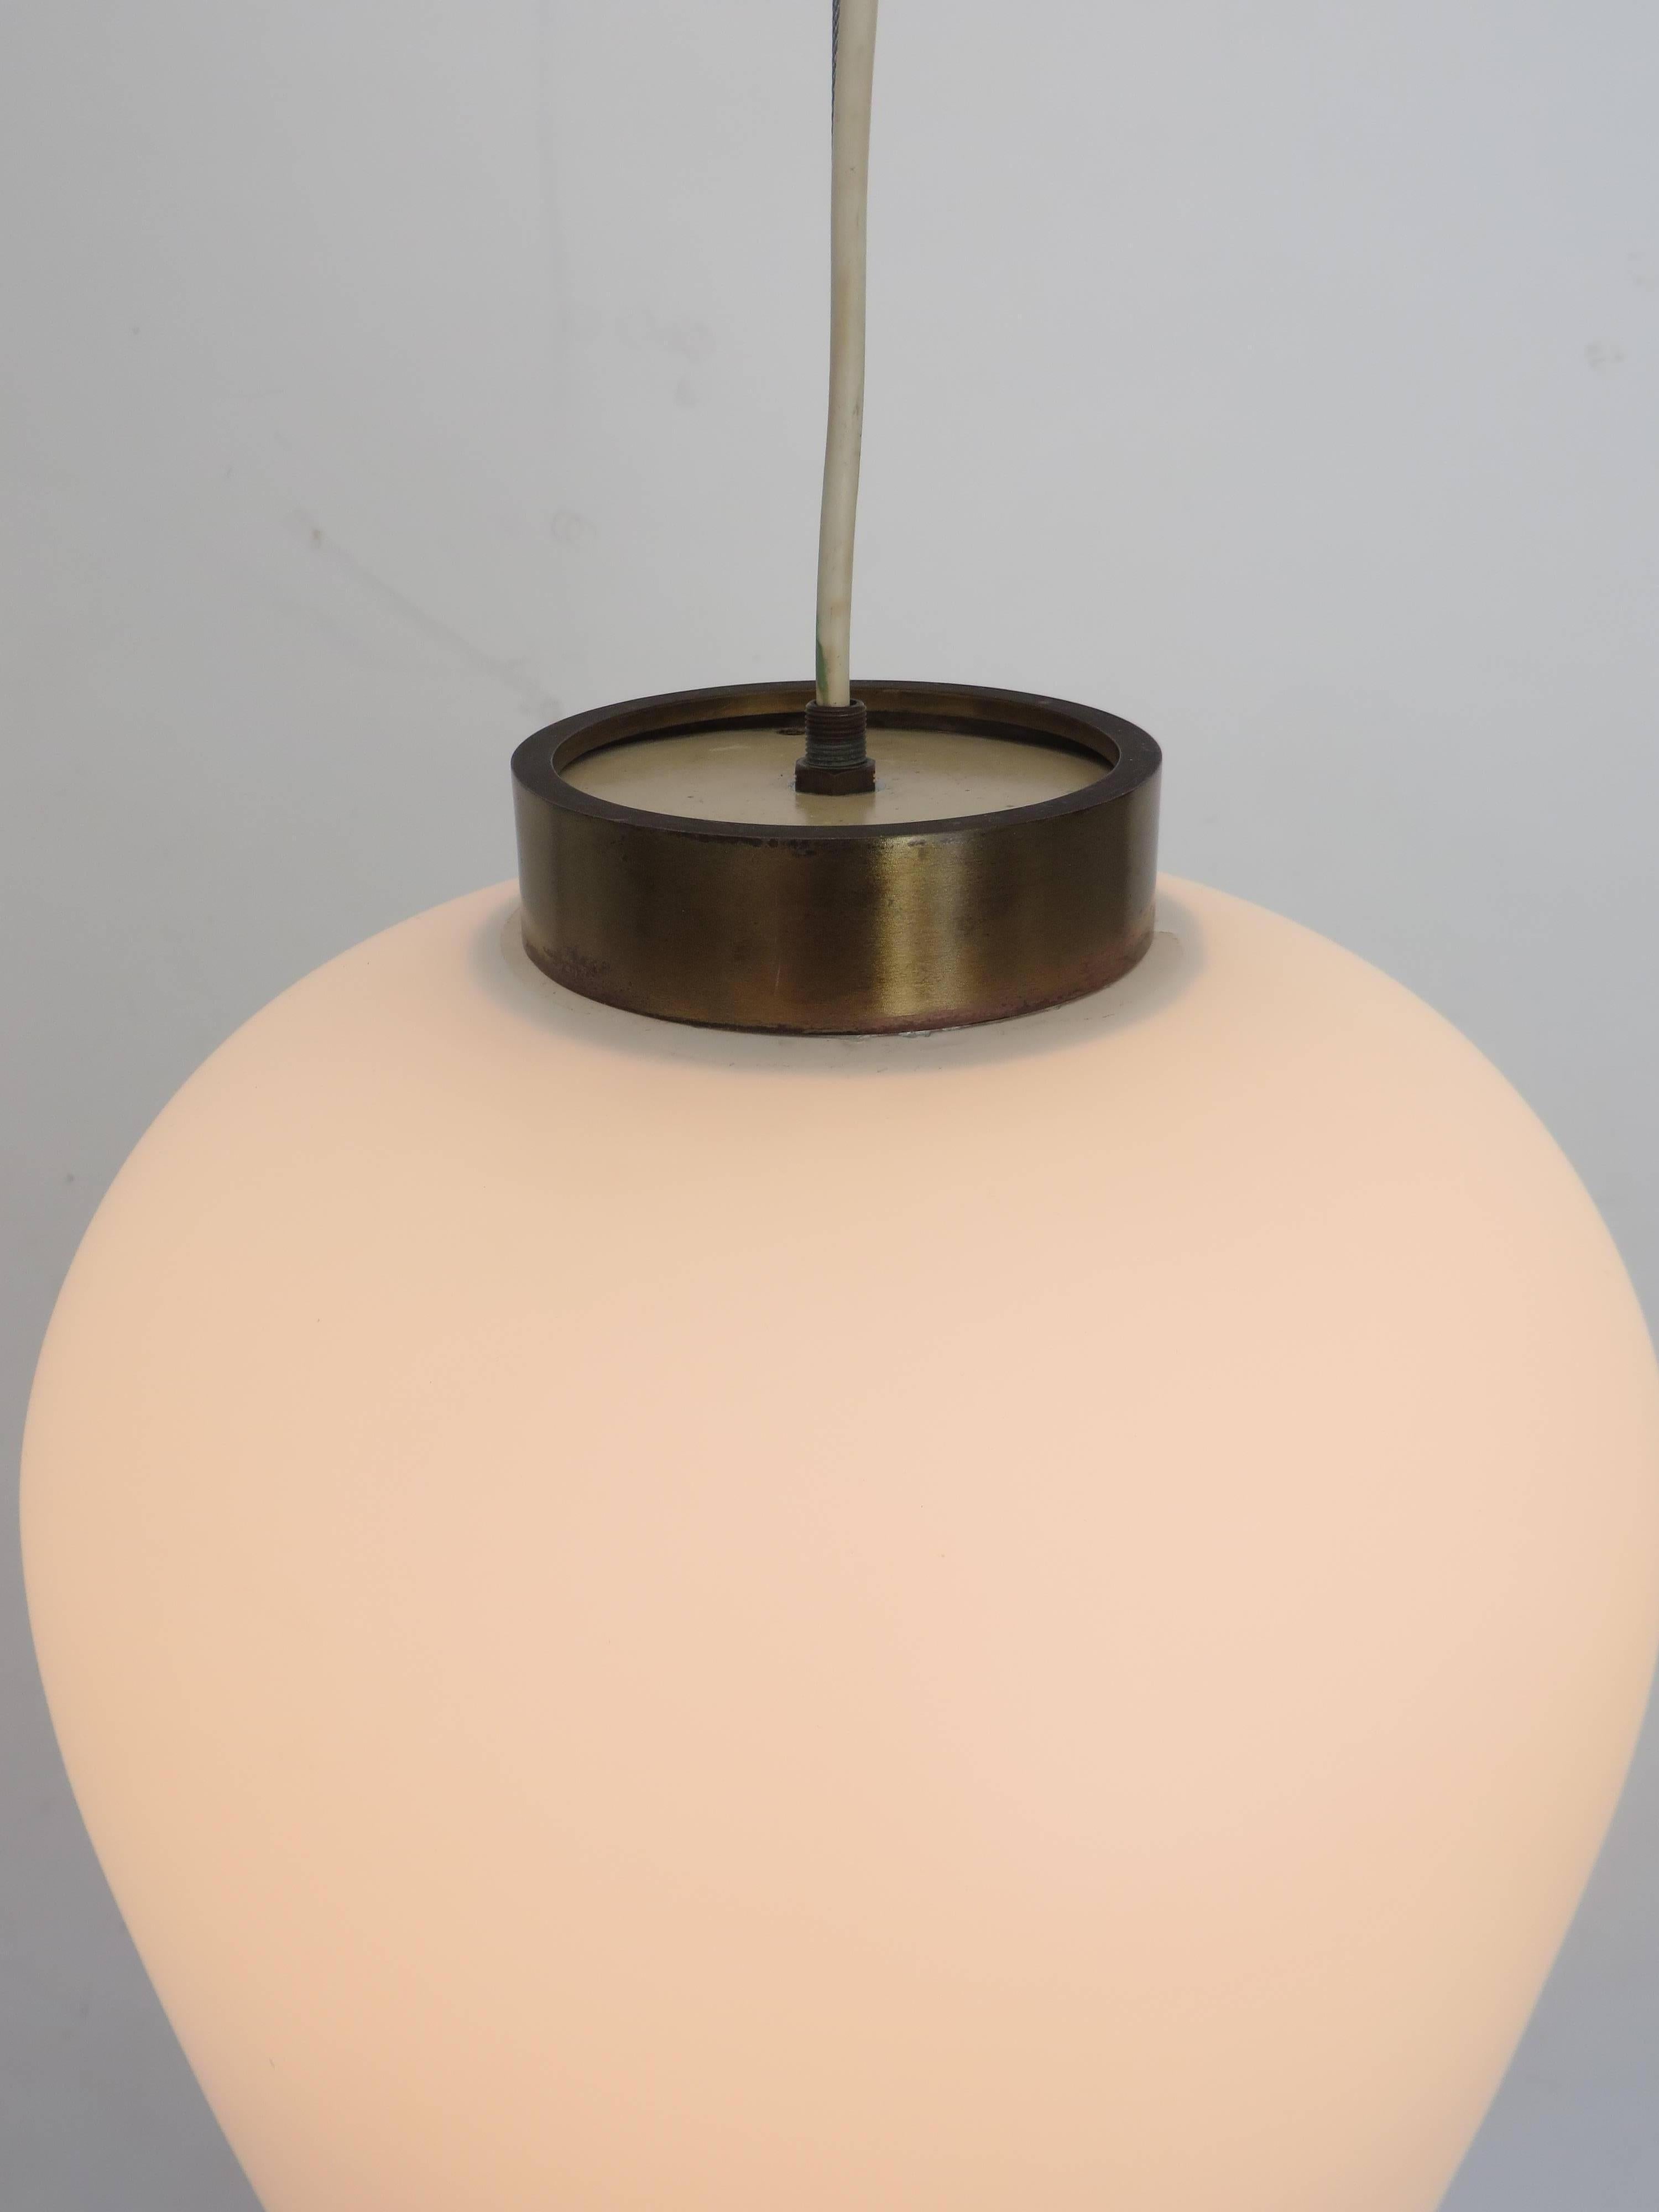 Stilnovo Italian Pendant Light Fixture with Brushed Opaque Glass Diffuser 2